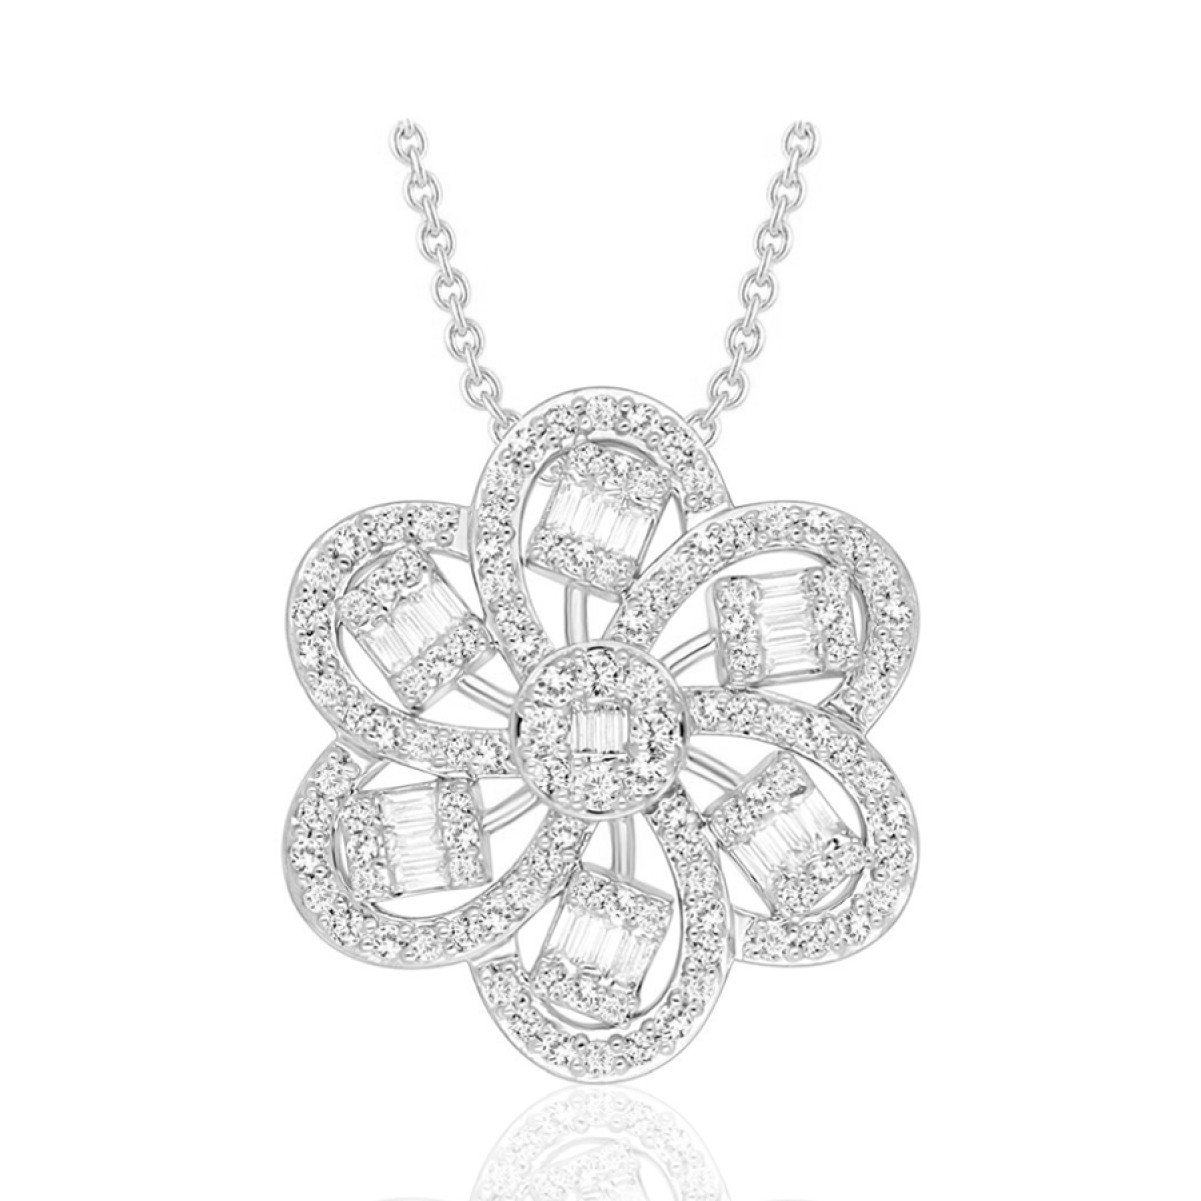 14K WHITE GOLD 1CT ROUND/BAGUETTE DIAMOND LADIES PENDANT WITH CHAIN  